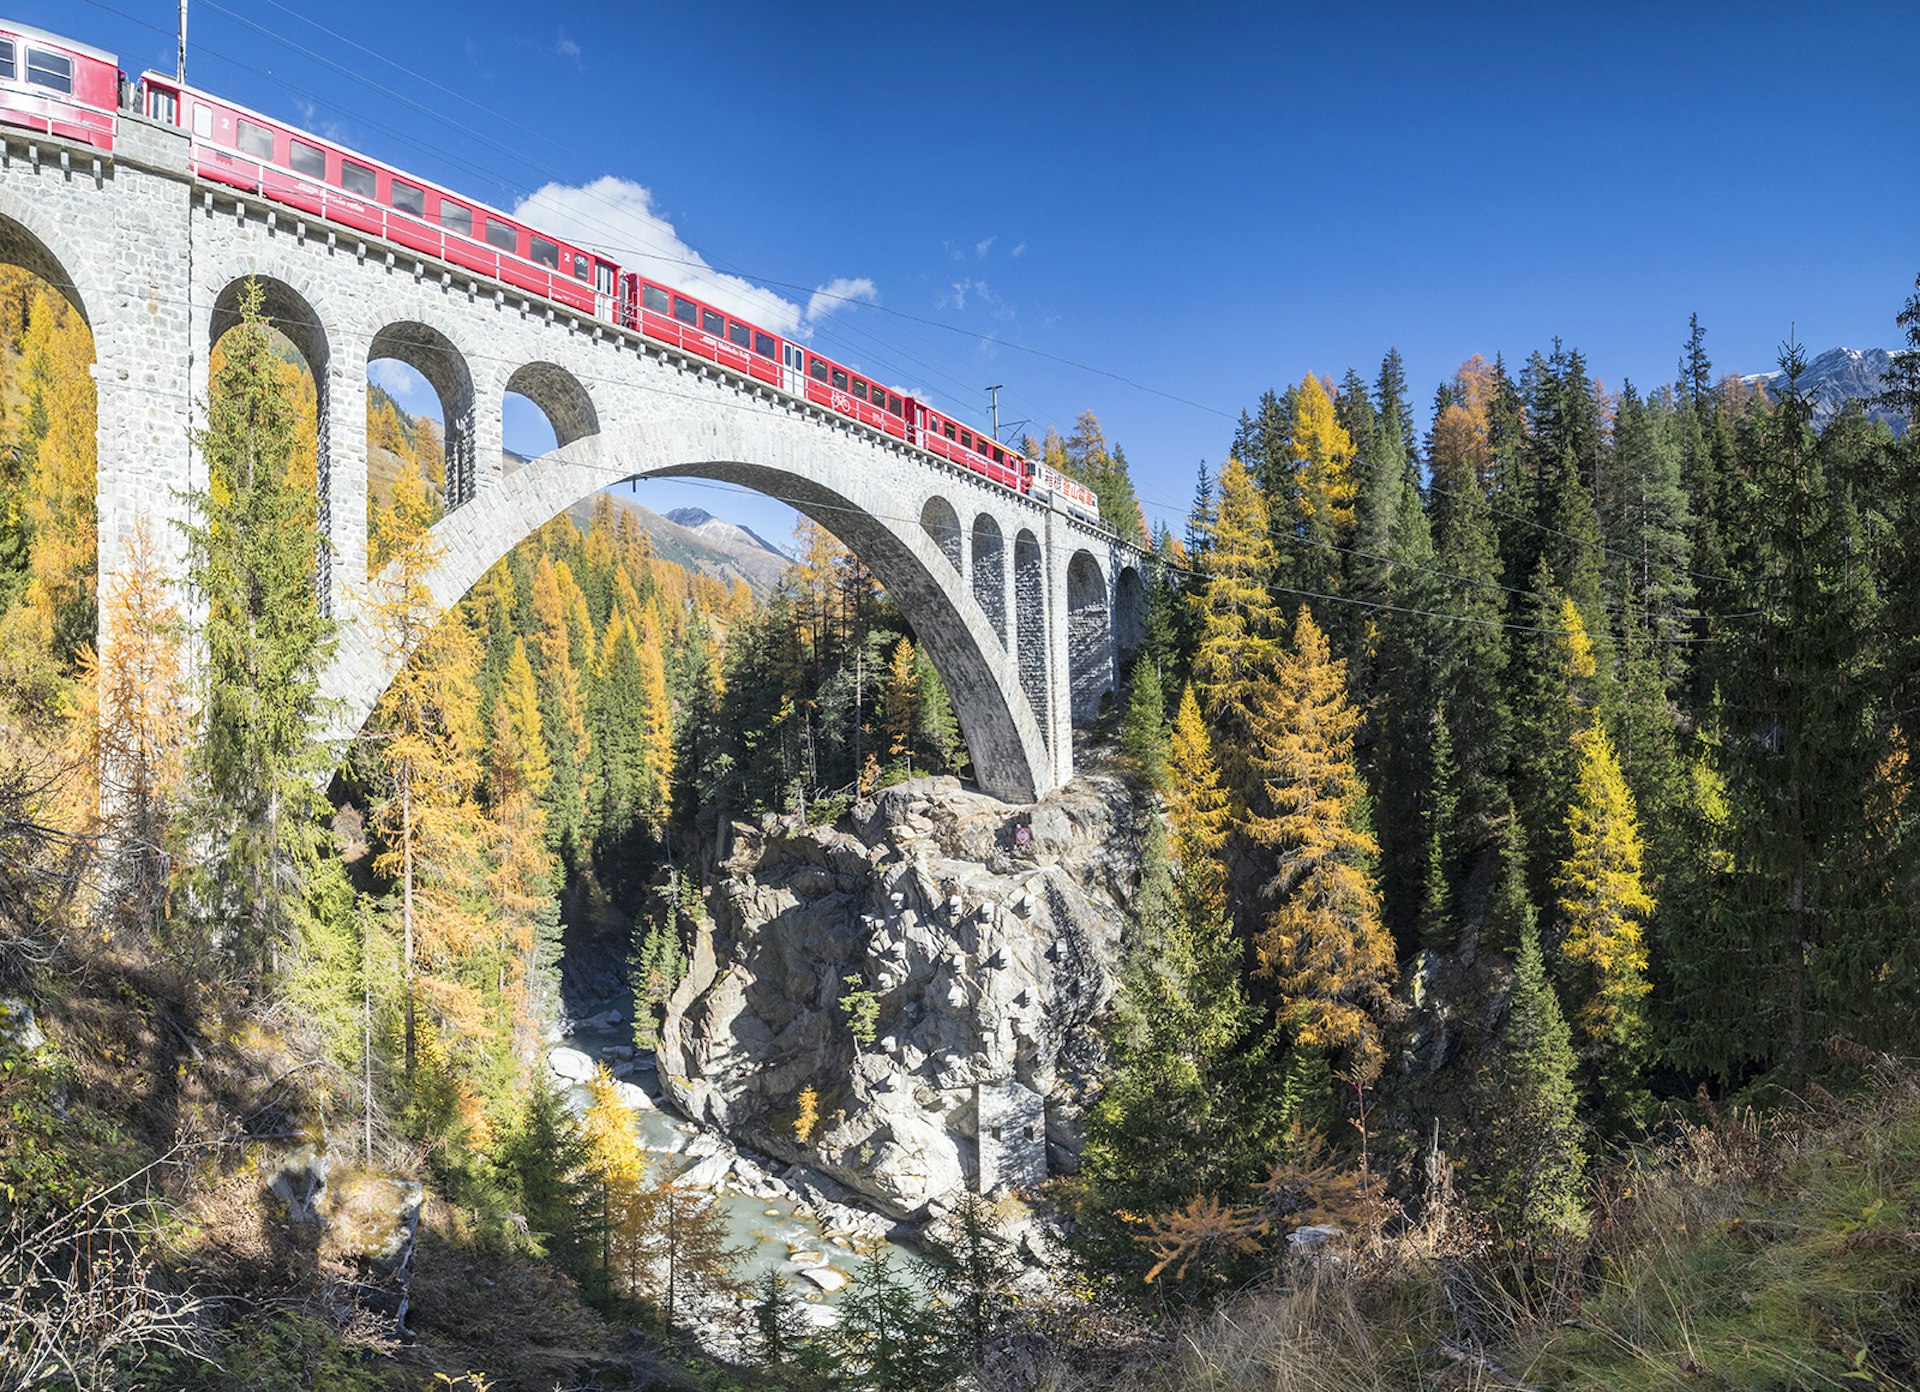 Features - Red train on viaduct Cinuos Chel Switzerland